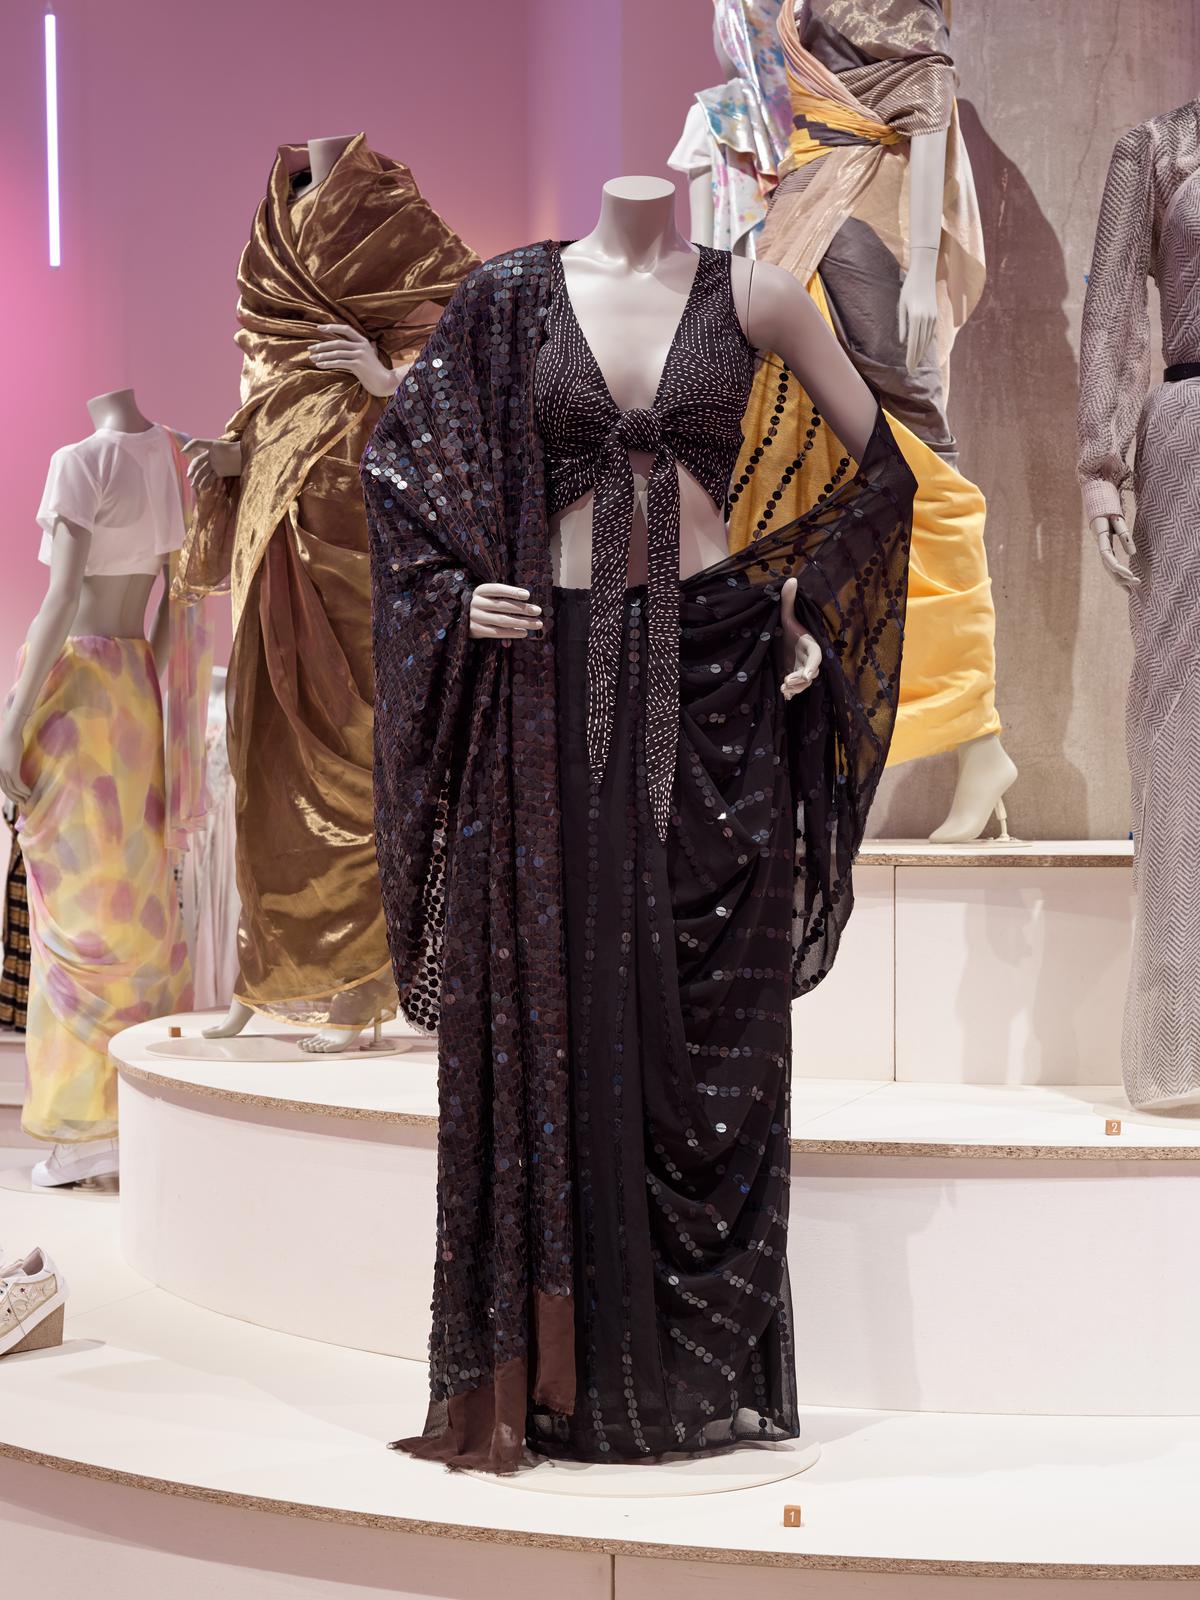 Abraham & Thakore’s sari embellished with sequins made from discarded X-rays